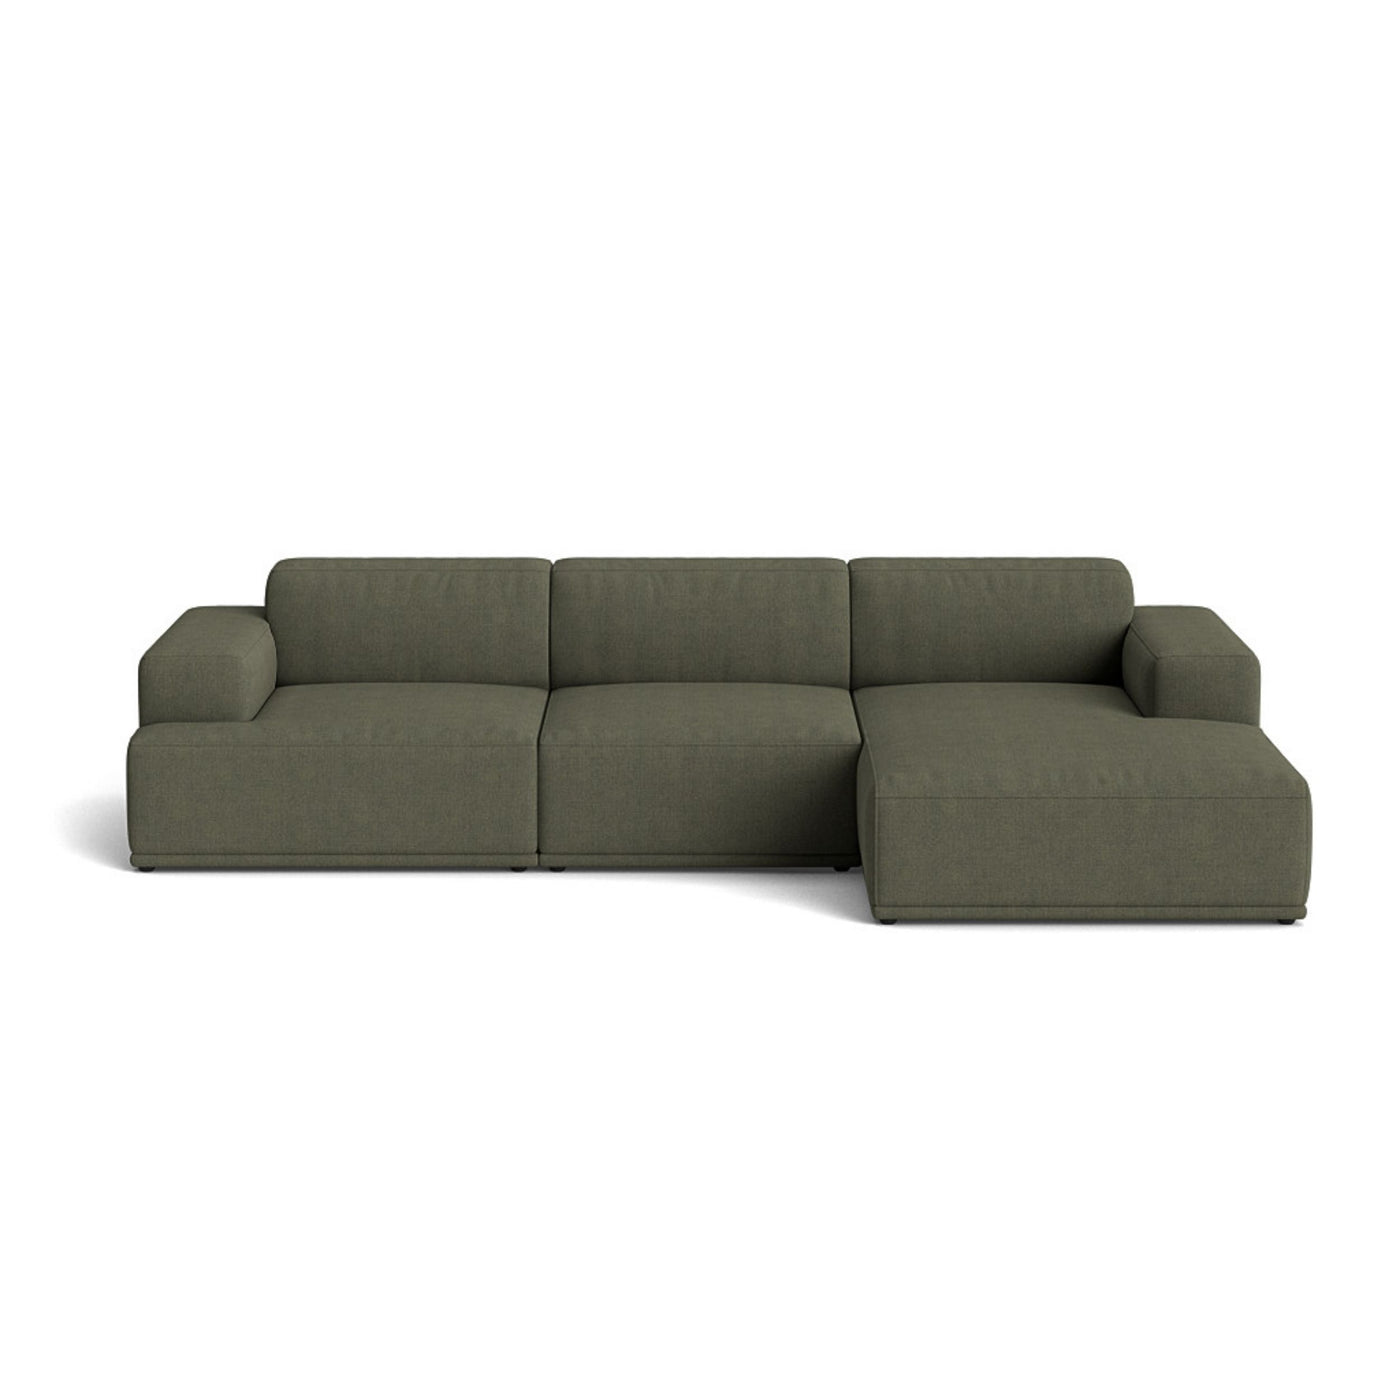 Muuto Connect Soft Modular 3 Seater Sofa, configuration 3. Made-to-order from someday designs. #colour_fiord-961